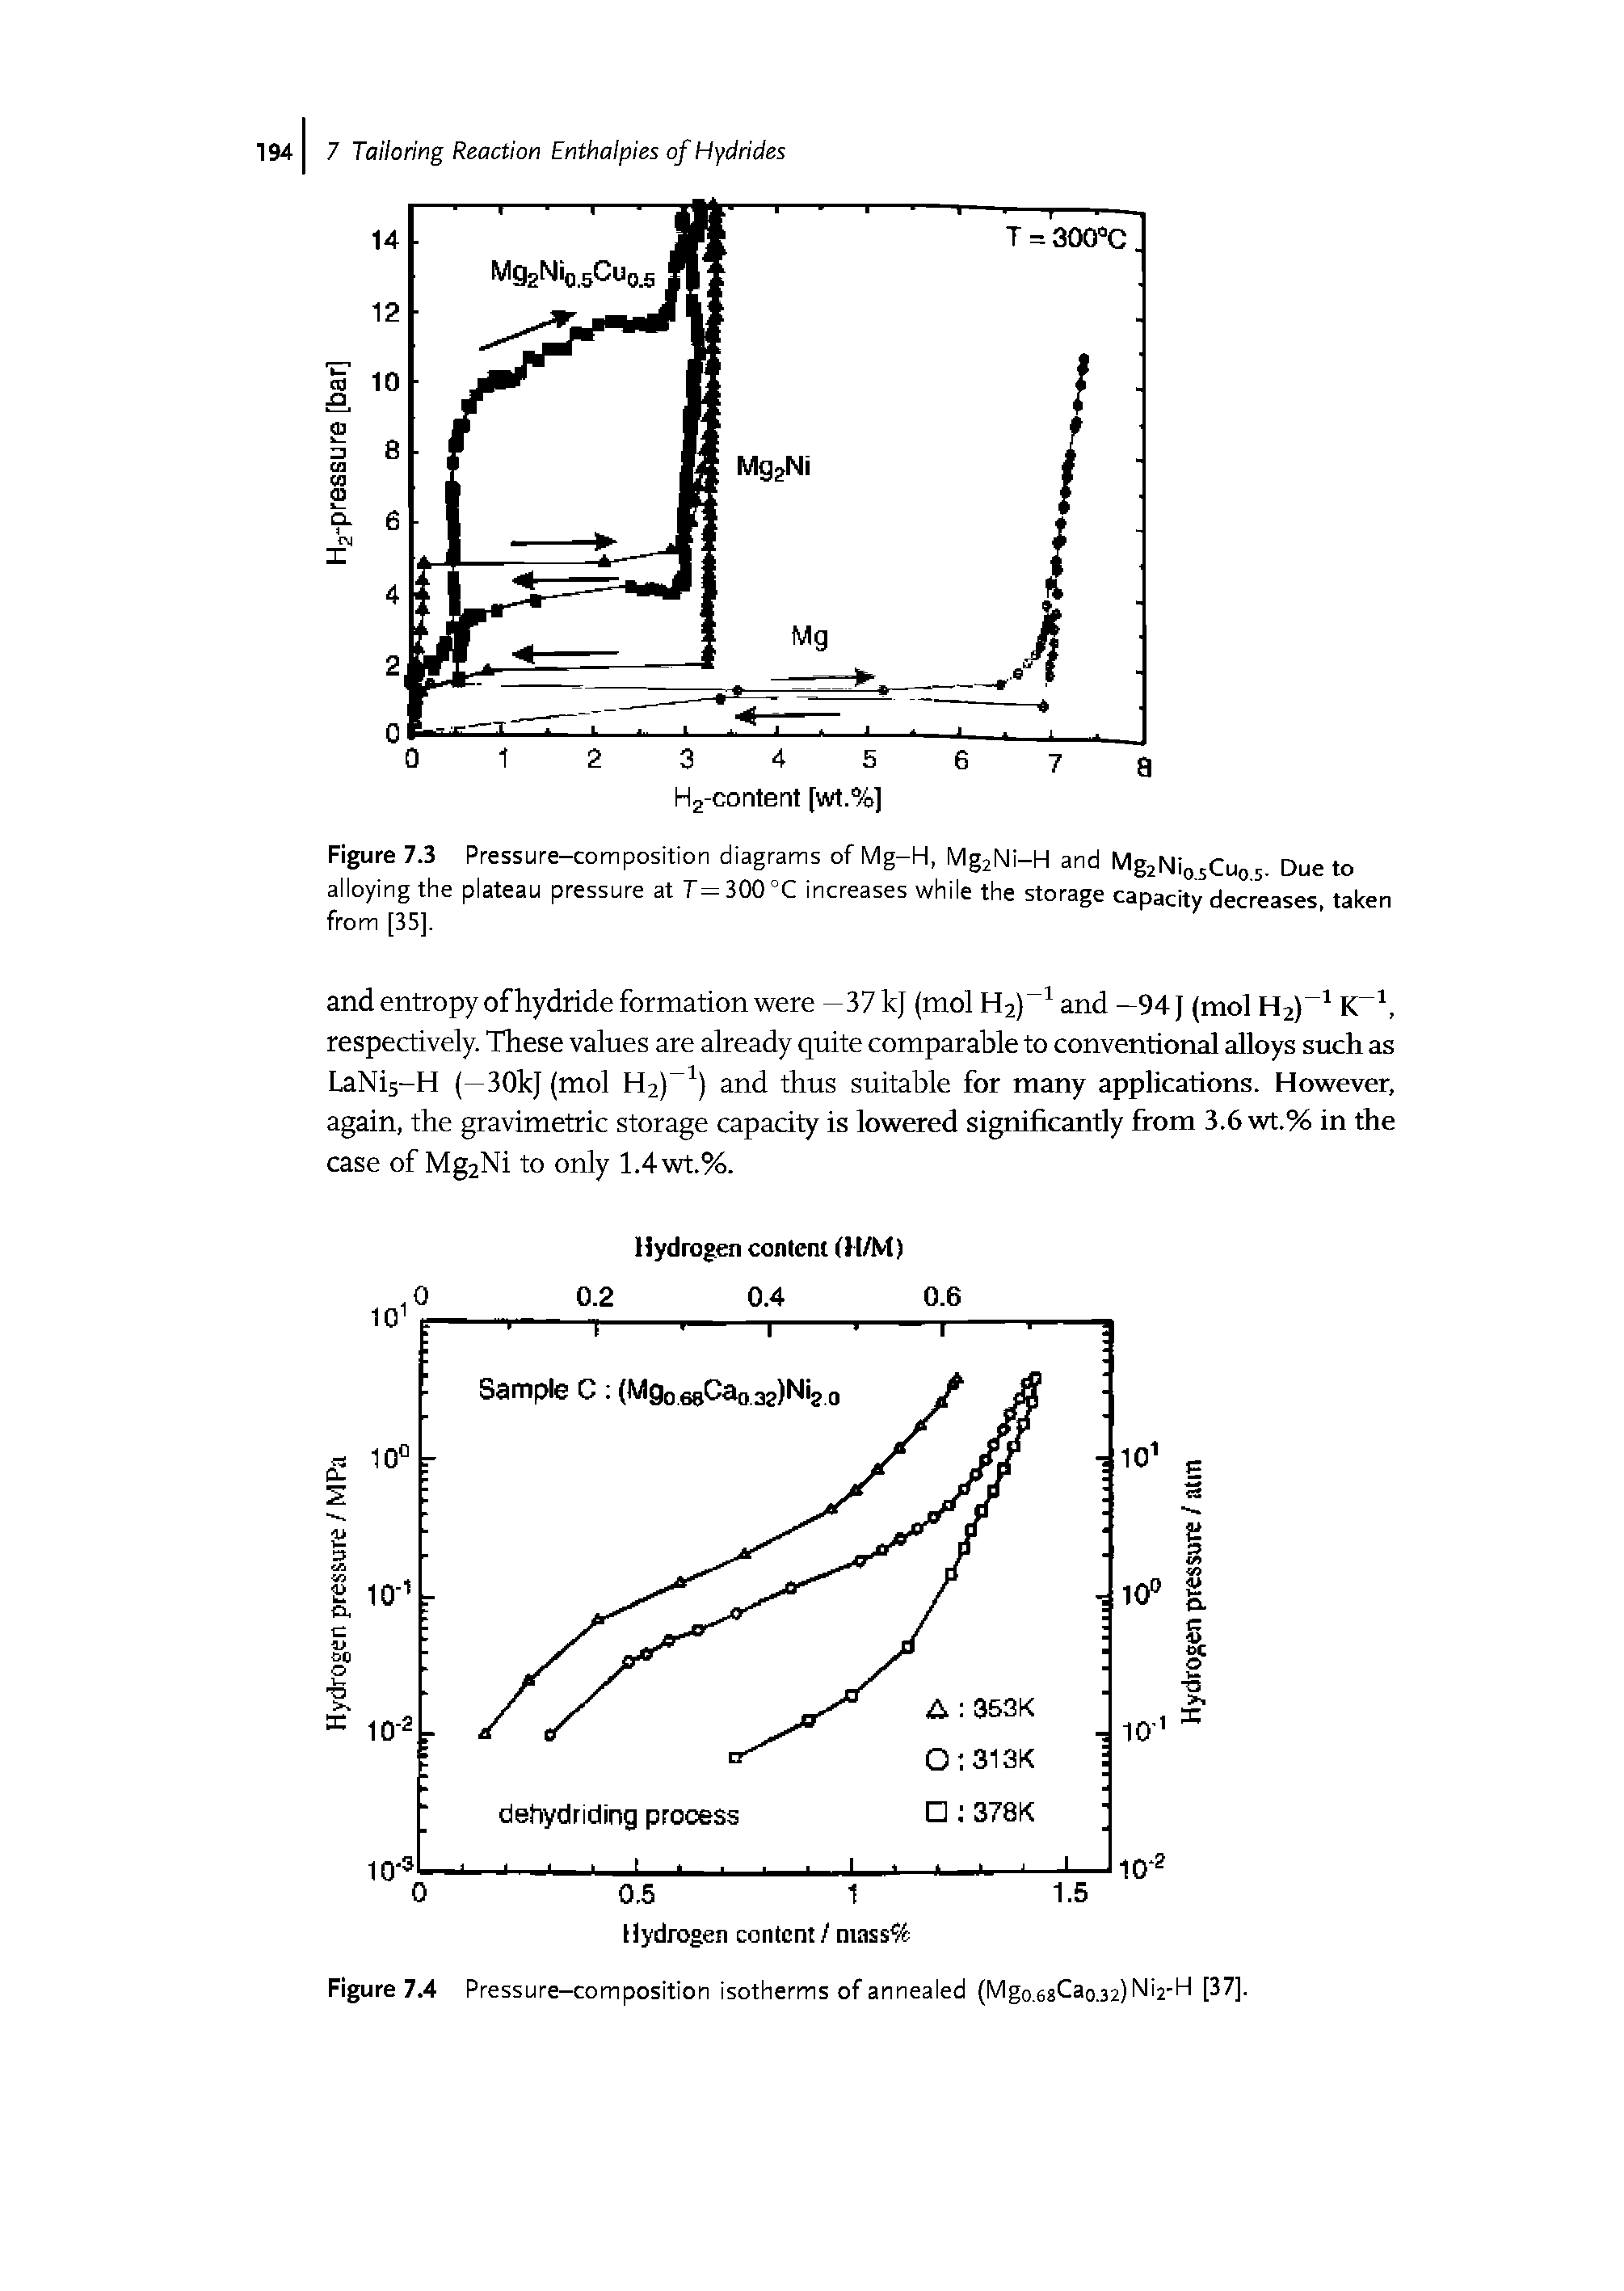 Figure 7.3 Pressure-composition diagrams of Mg-H, MgjNi-H and Mg2Nio5Cuos Due to alloying the plateau pressure at 7= 300 °C increases while the storage capacity decreases, taken from [35],...